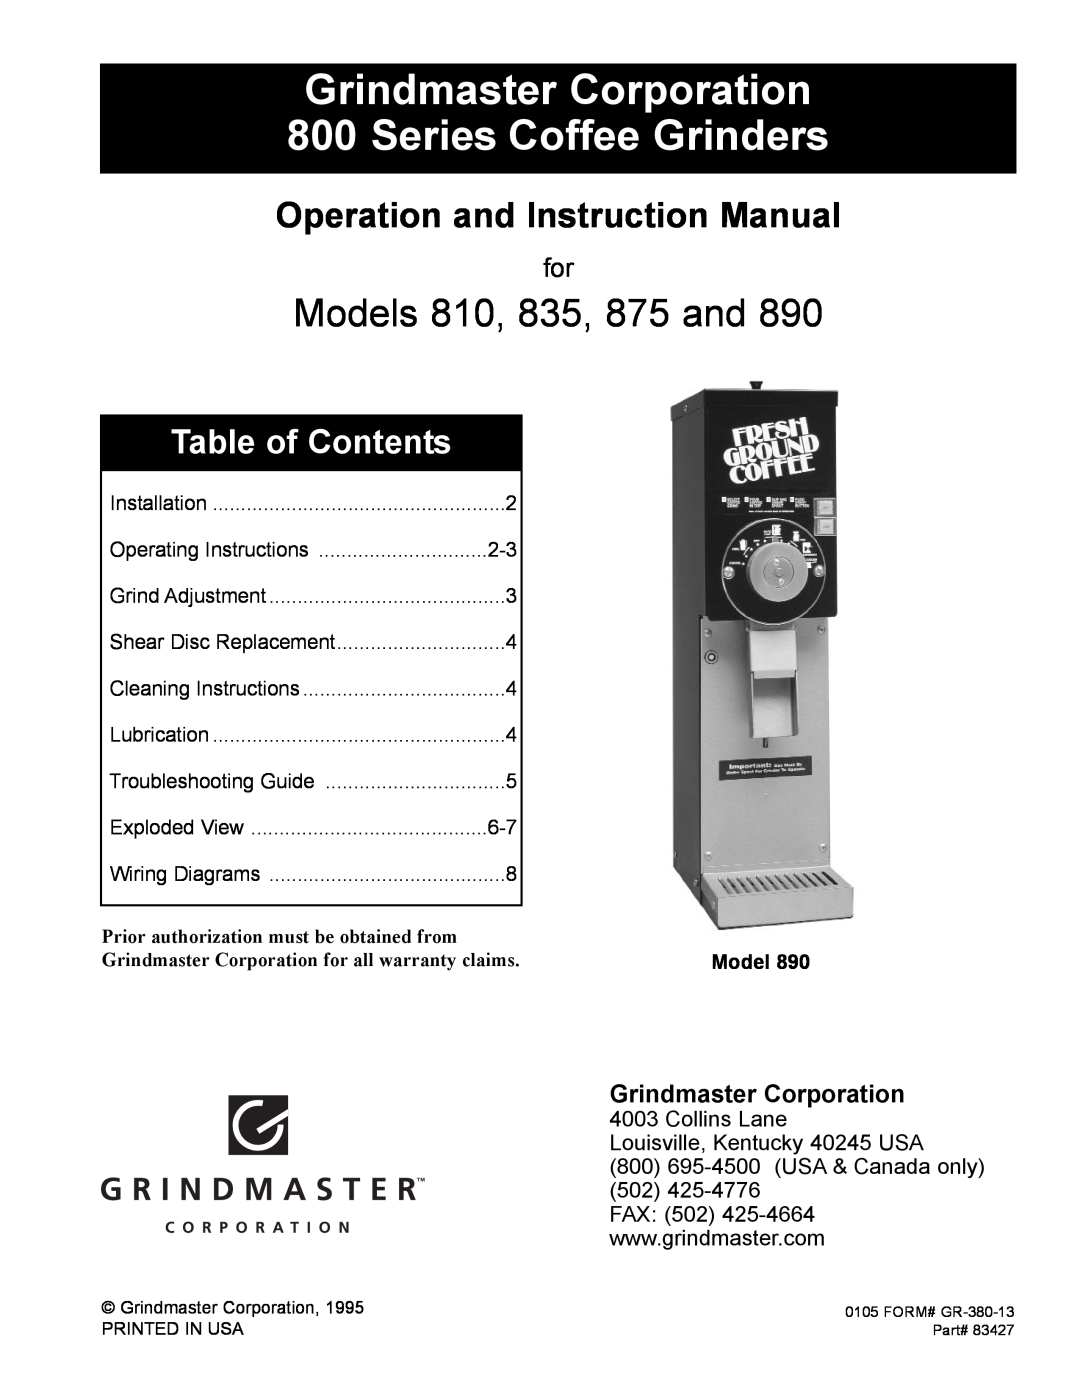 Grindmaster 890 instruction manual Grindmaster Corporation, Series Coffee Grinders, Models 810, 835, 875 and 